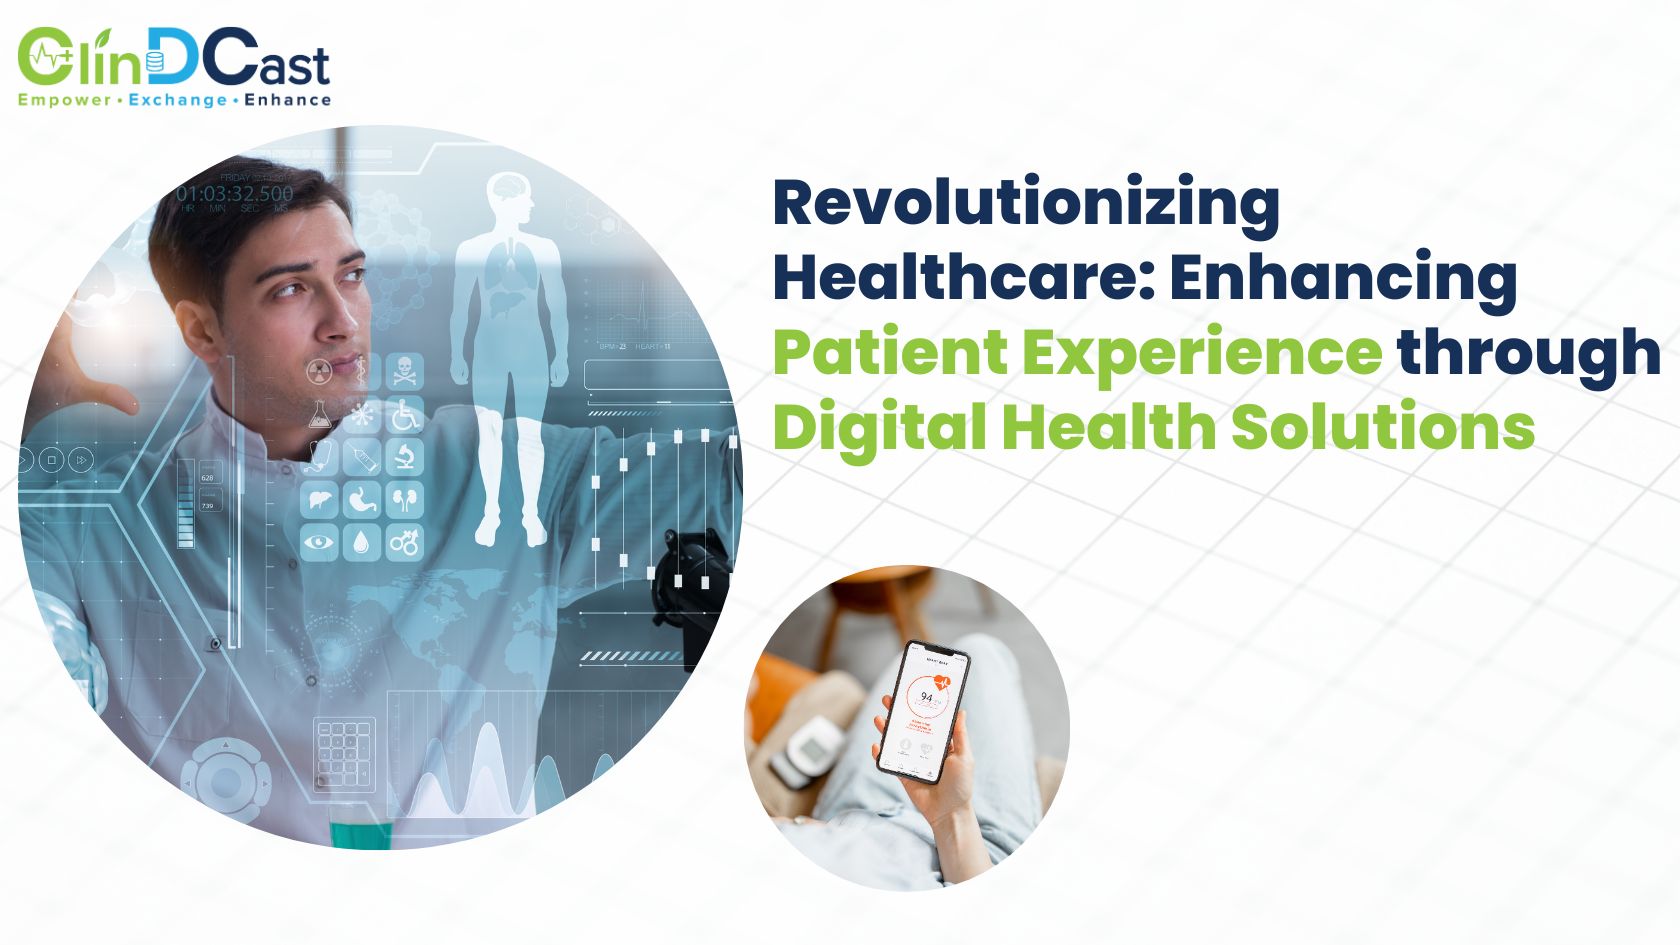 How Digital Health Solutions Improve the Patient Experience